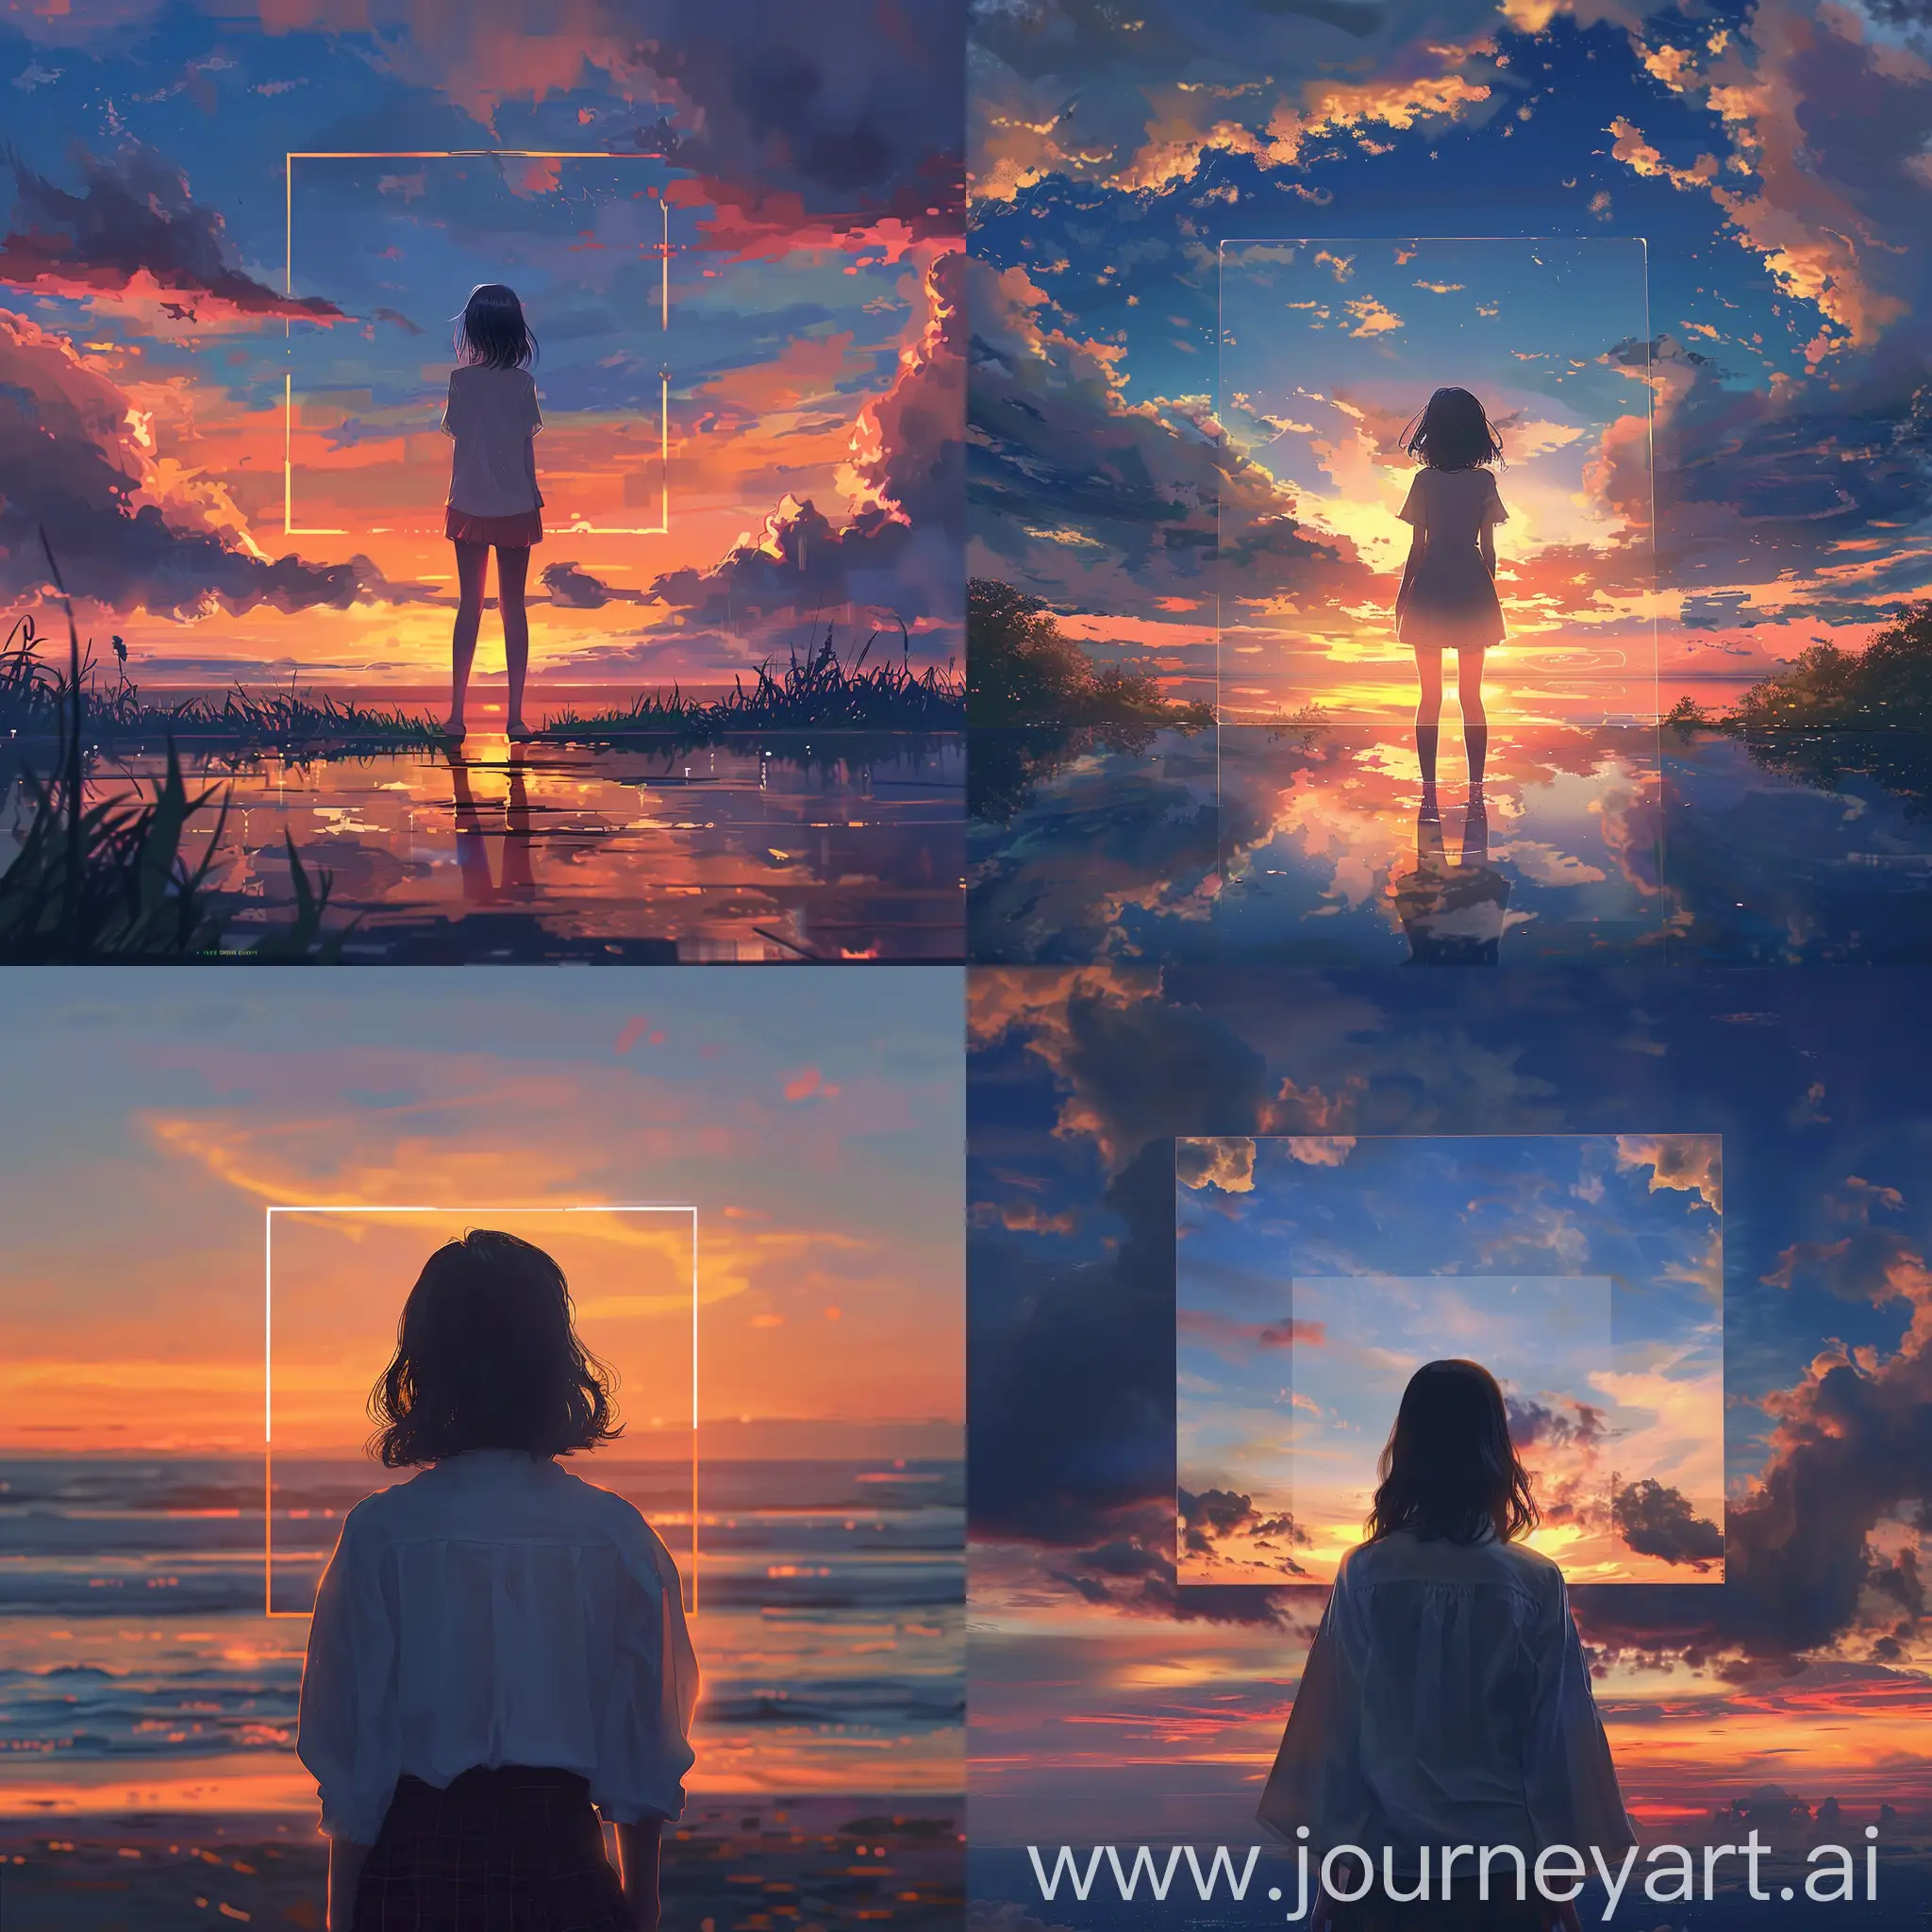 Girl-Standing-Alone-with-Sunset-Silhouette-in-Unrealistic-Landscape